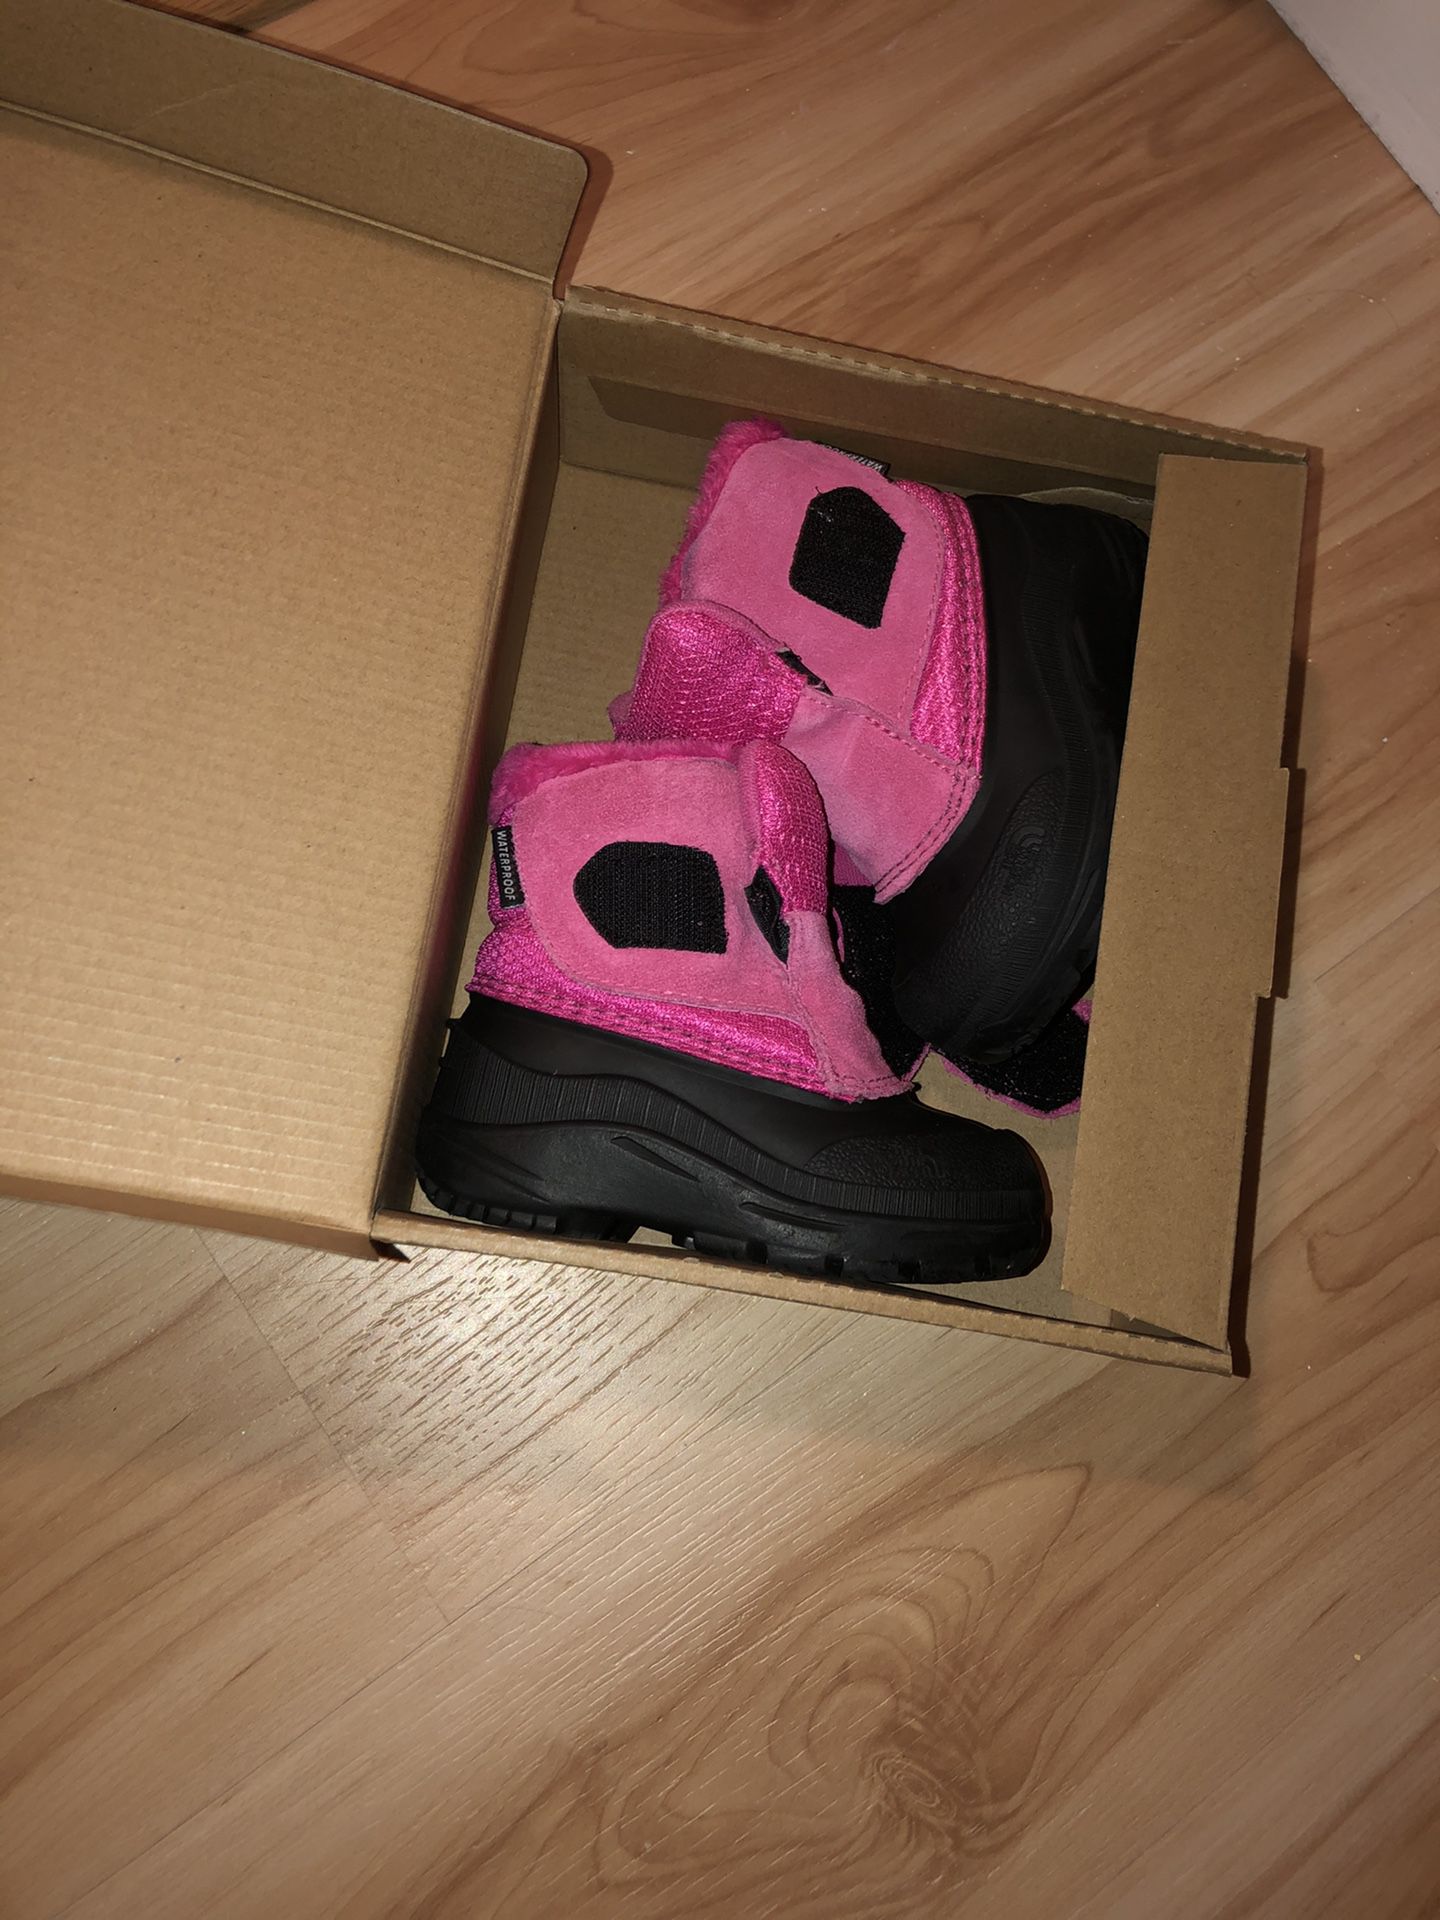 Northface snow boots toddler 7c